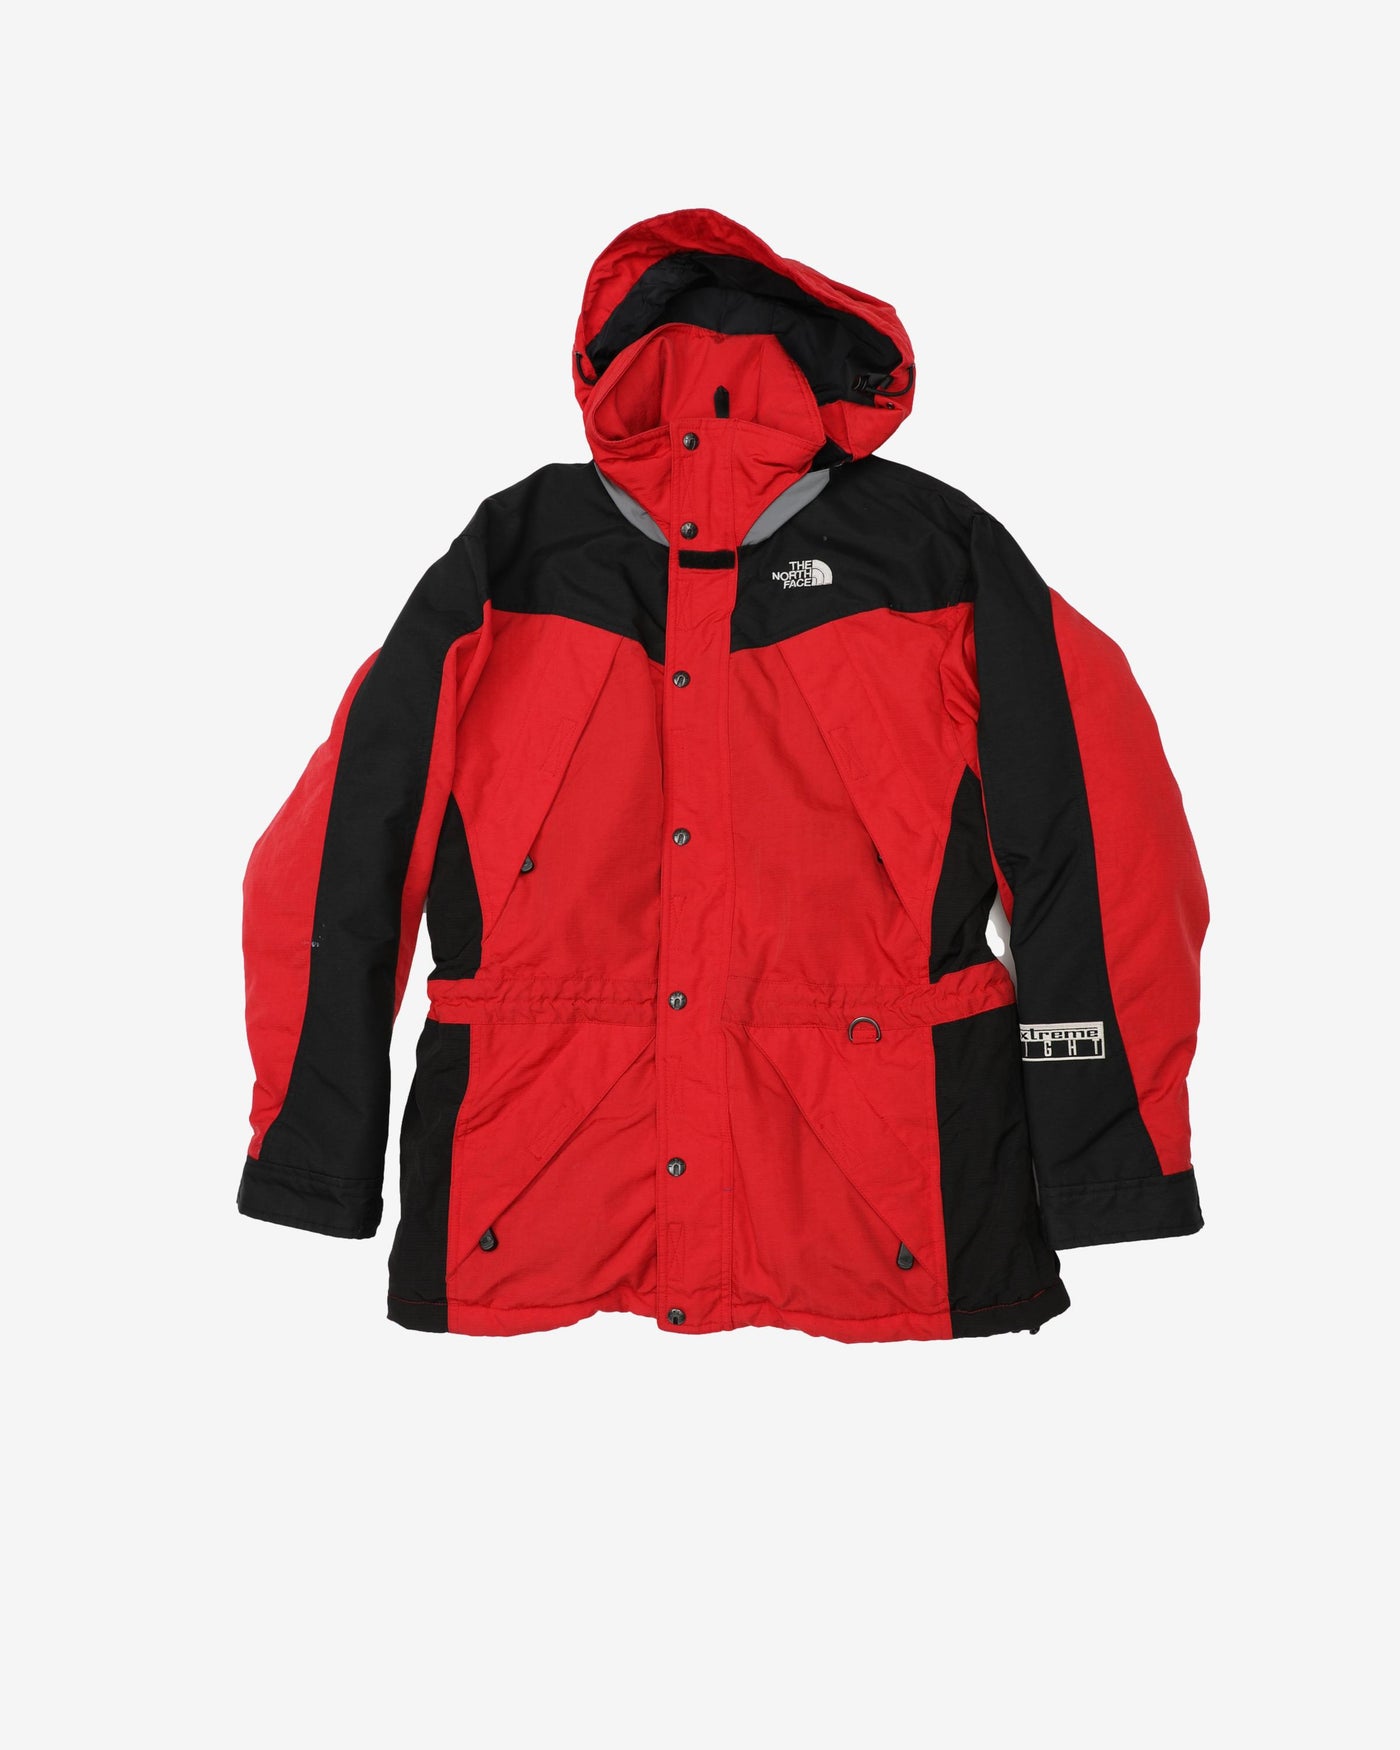 Vintage 90s The North Face Red / Black Hooded Rain Jacket - S